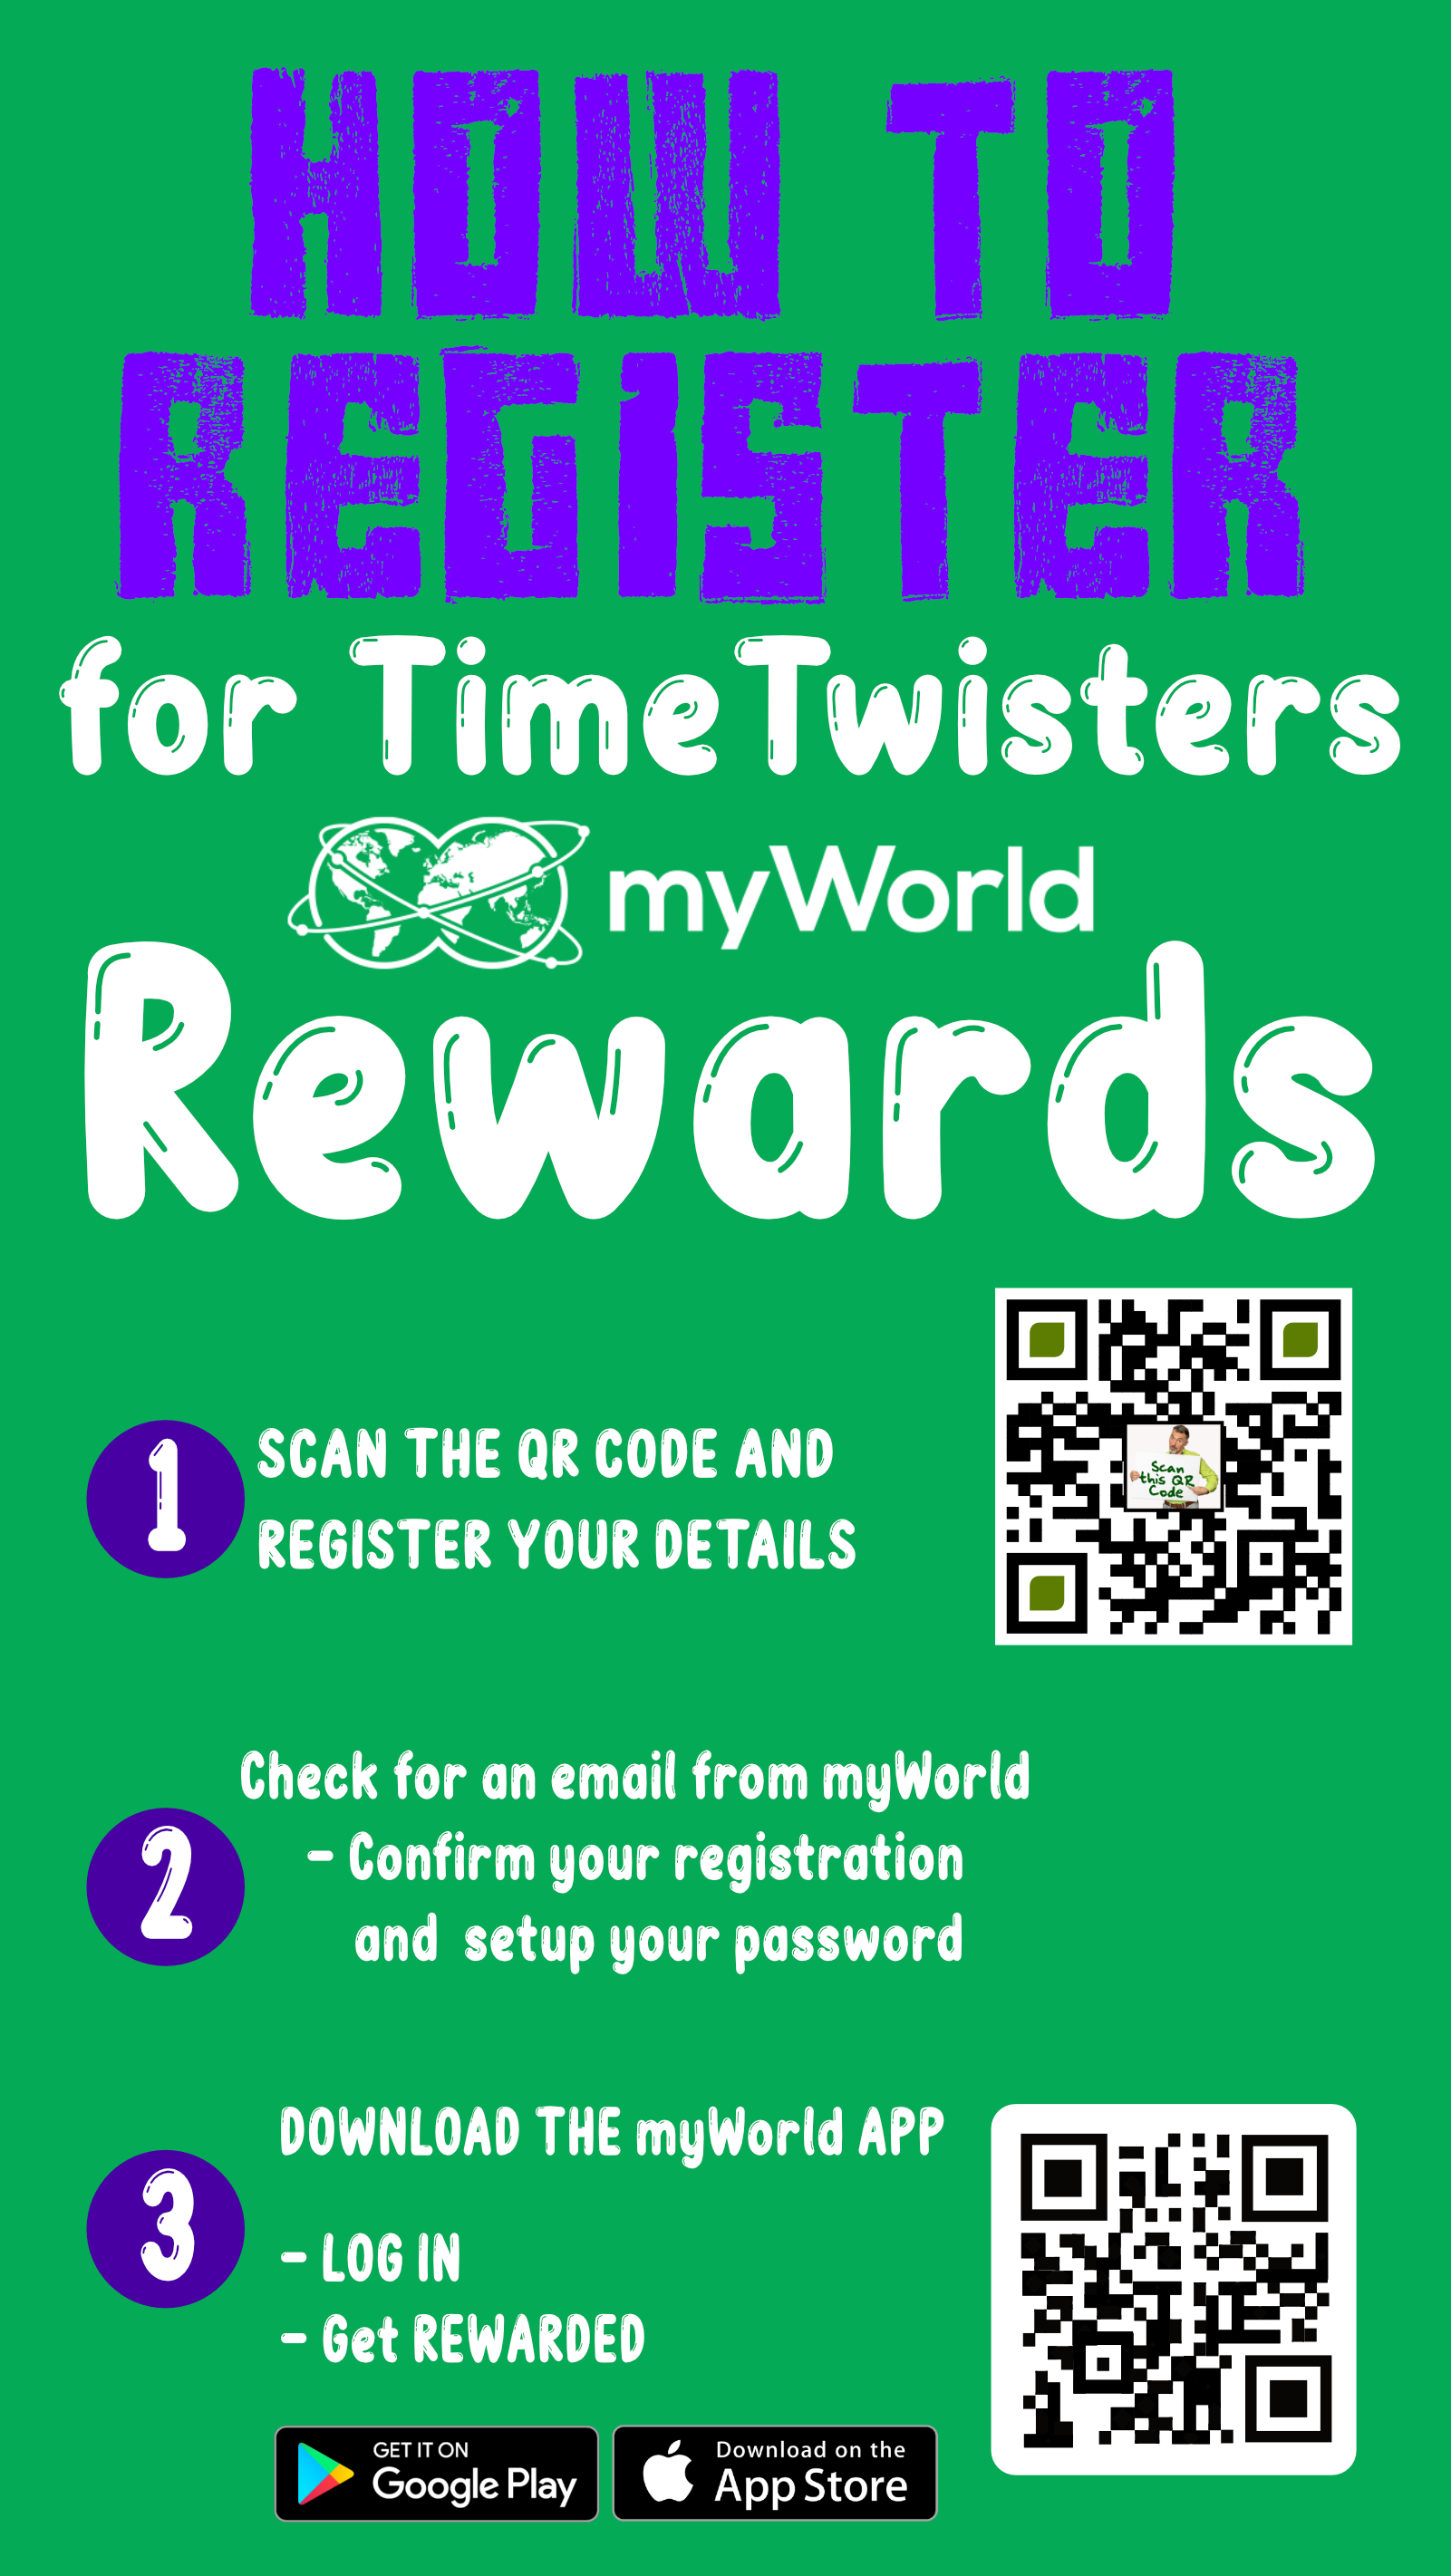 How to register for the TimeTwisters Rewards Club